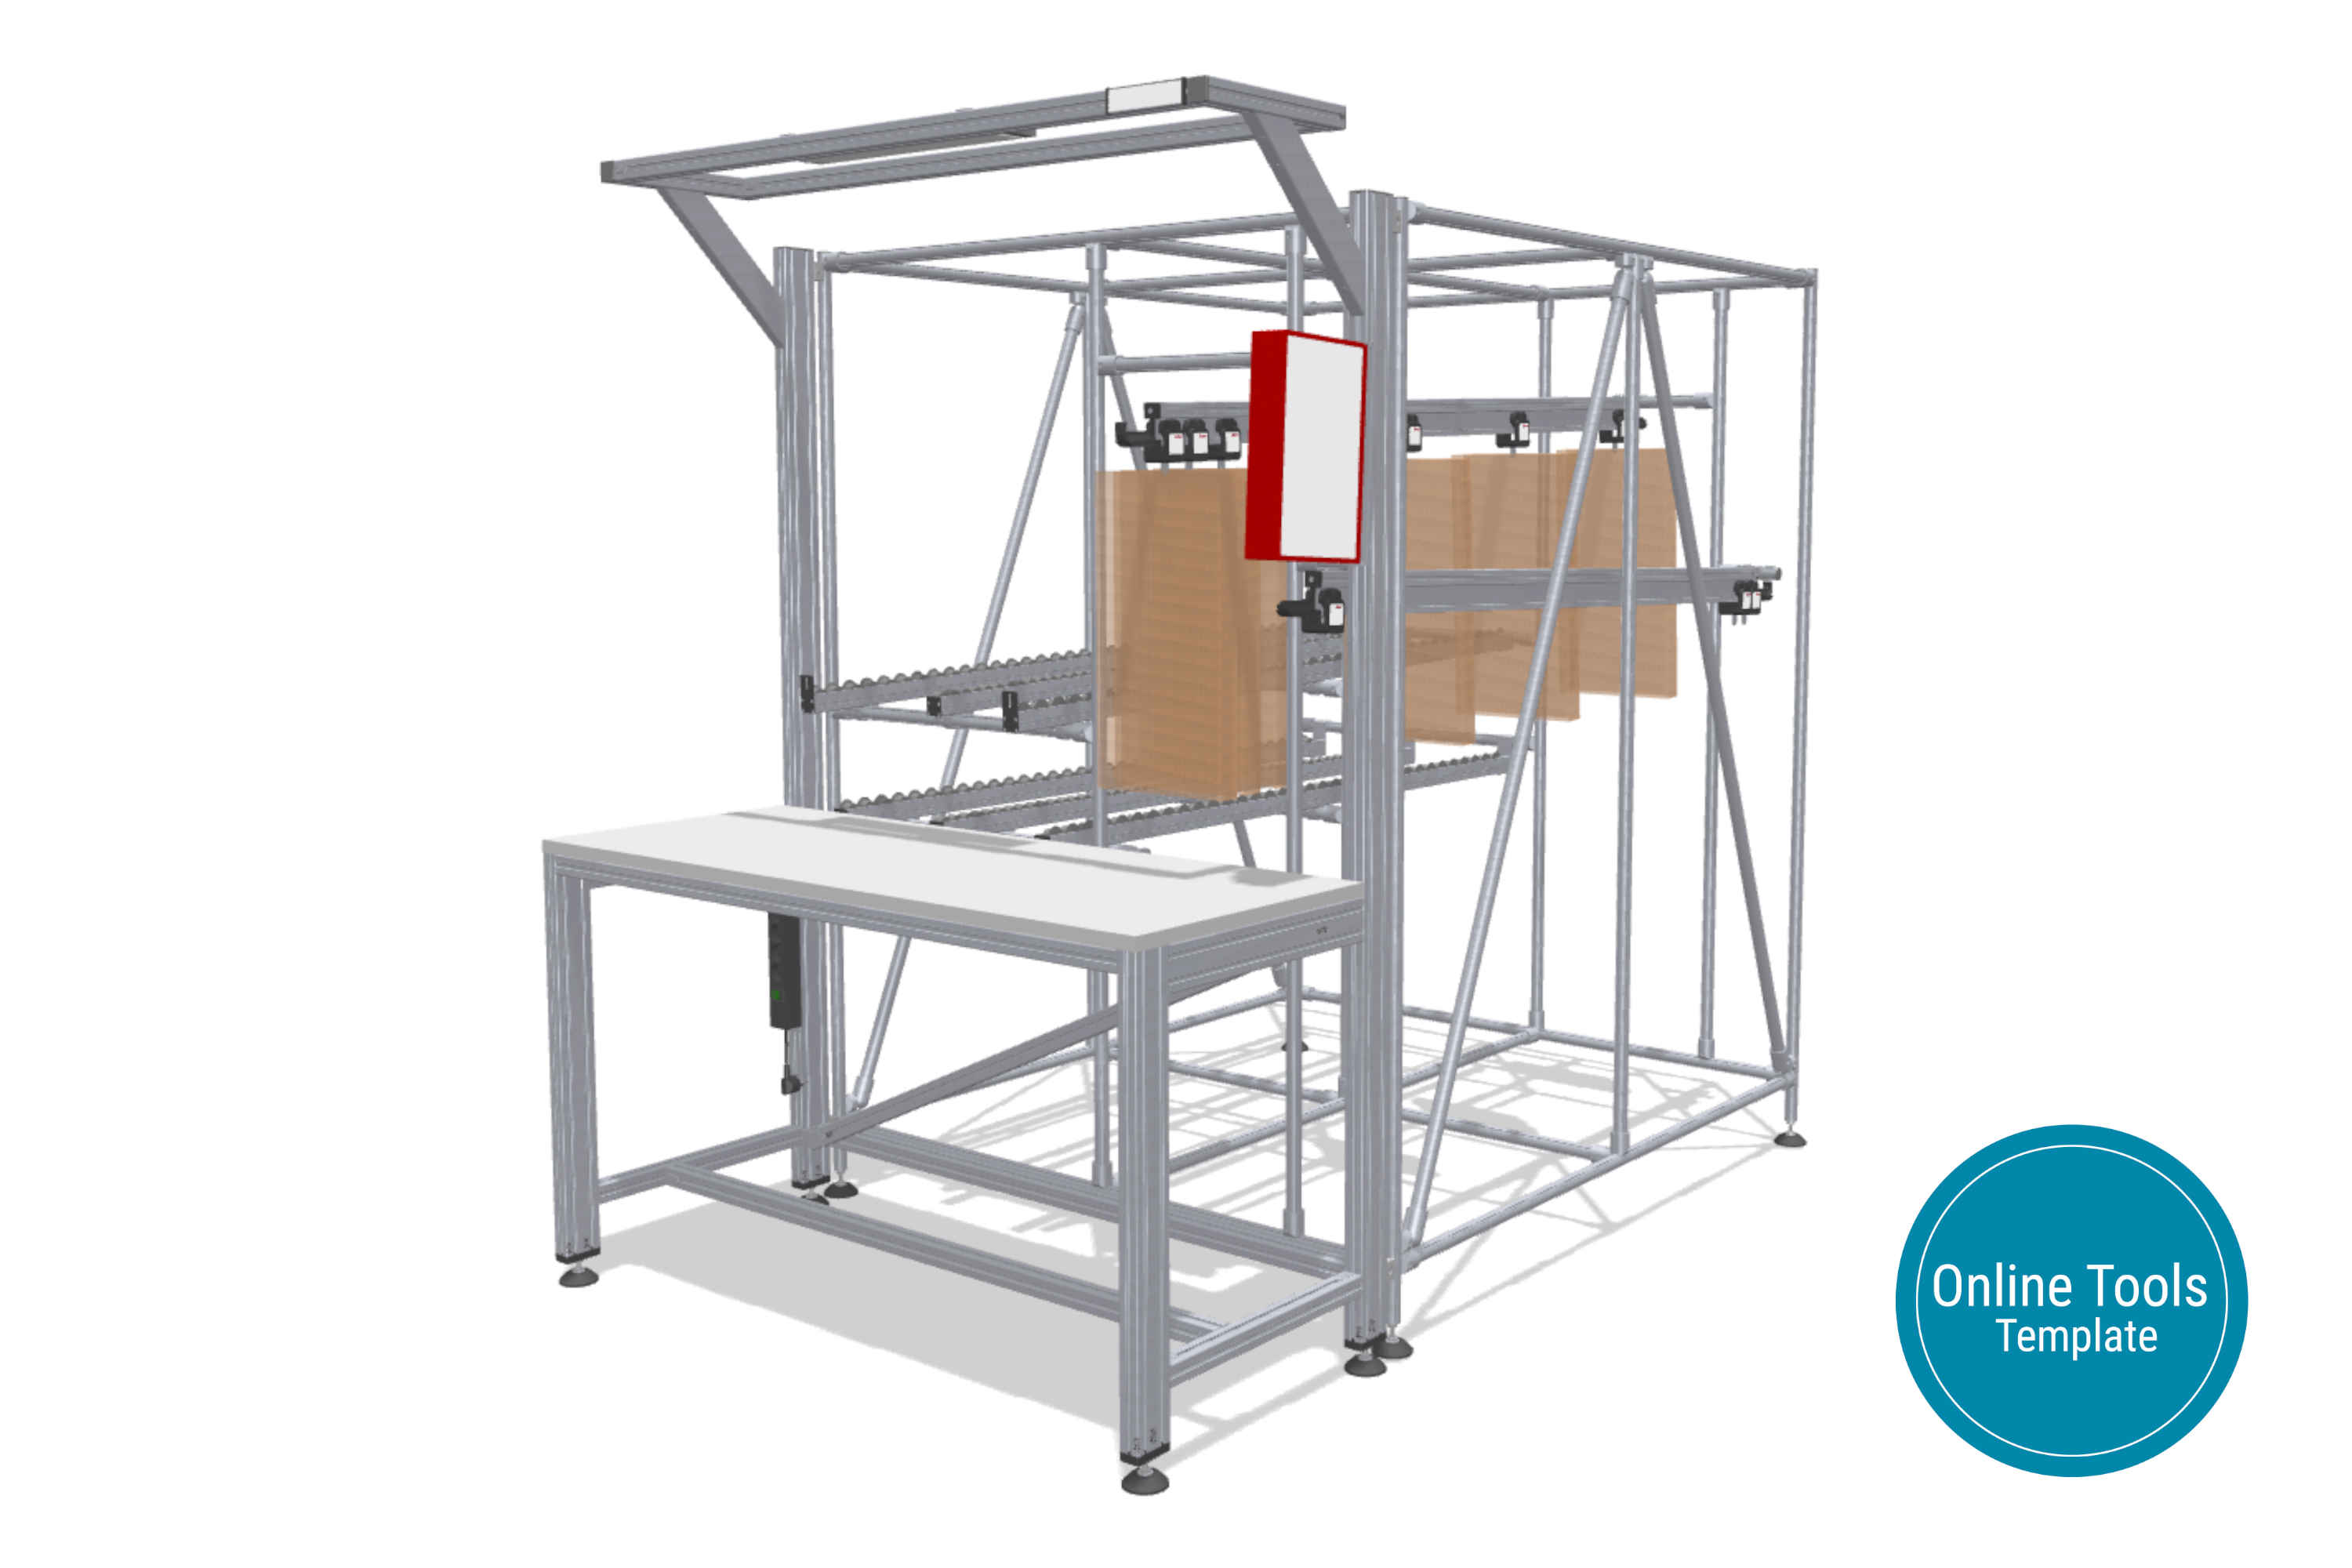 Workstation with integrated suspended conveyor system and FIFO rack